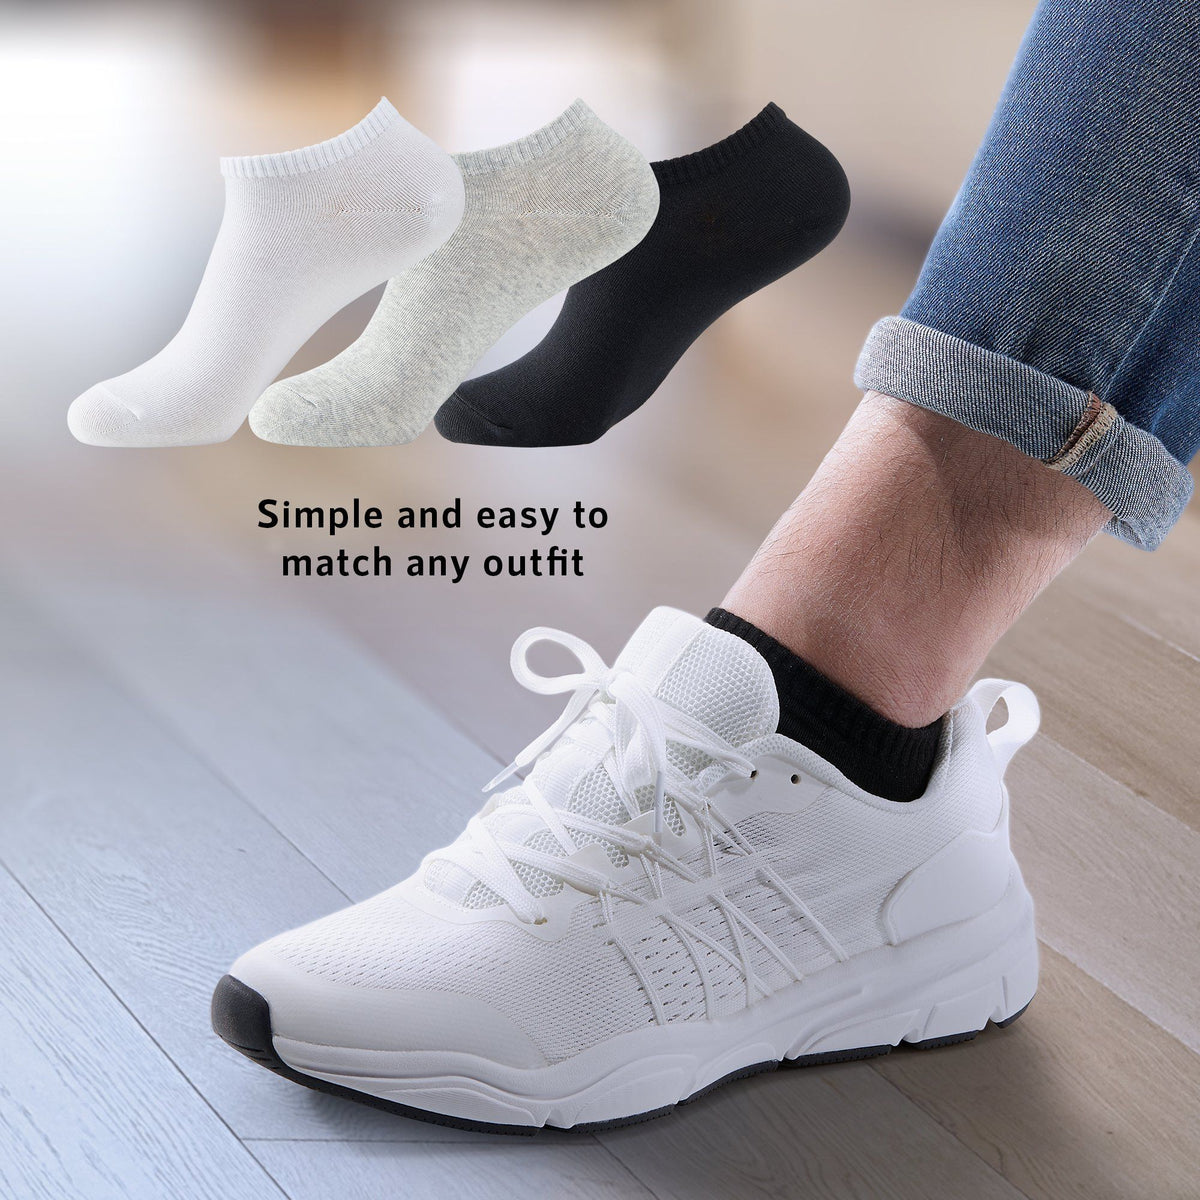 Where to Buy Socks for Small Feet [2022 Guide]